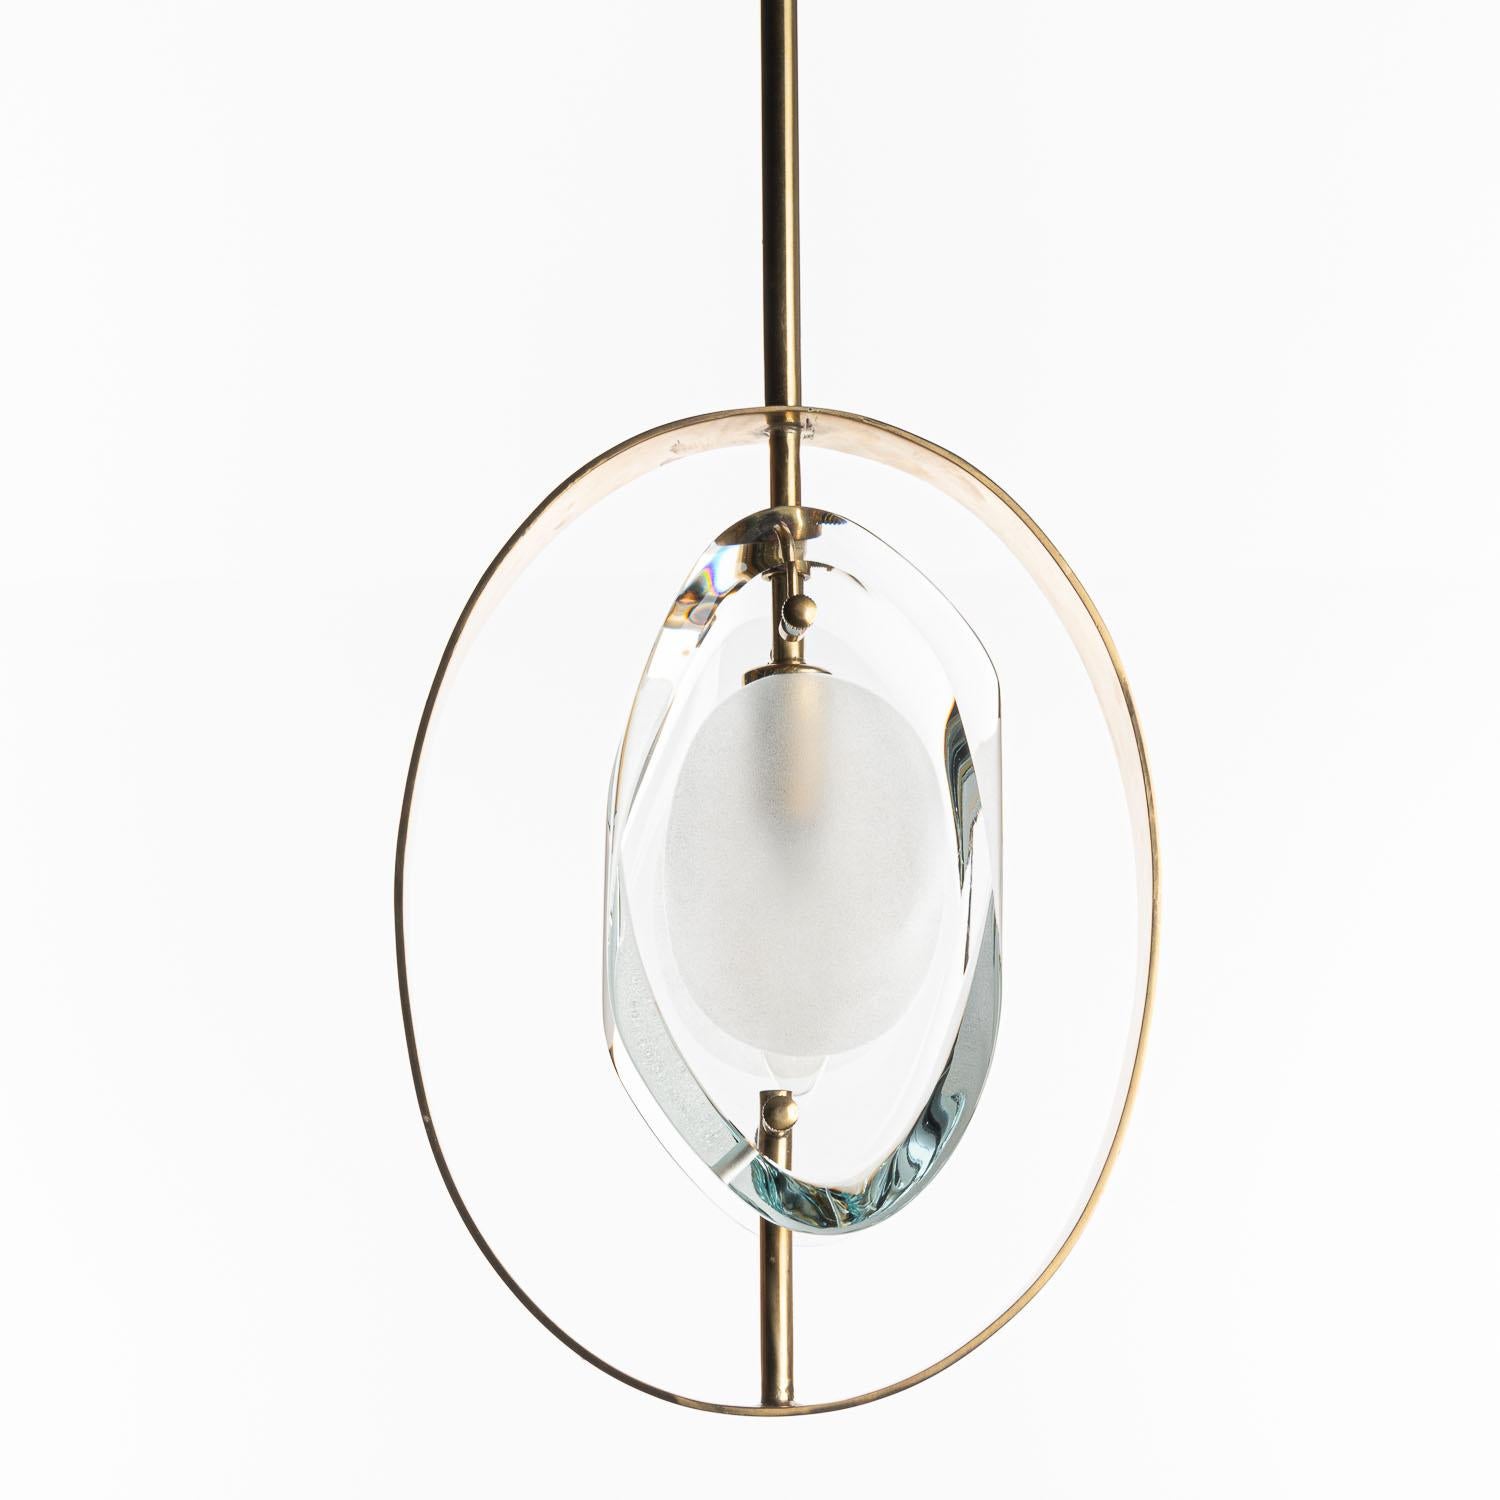 Very elegant 1960's pendant by Max Ingrand for Fontana Arte, Model 1933, from the Micro series. 
The iconic double lens cut panels of thick (2cm) profiled polished Murano glass with etched glass centers placed within a polished brass ring suspended